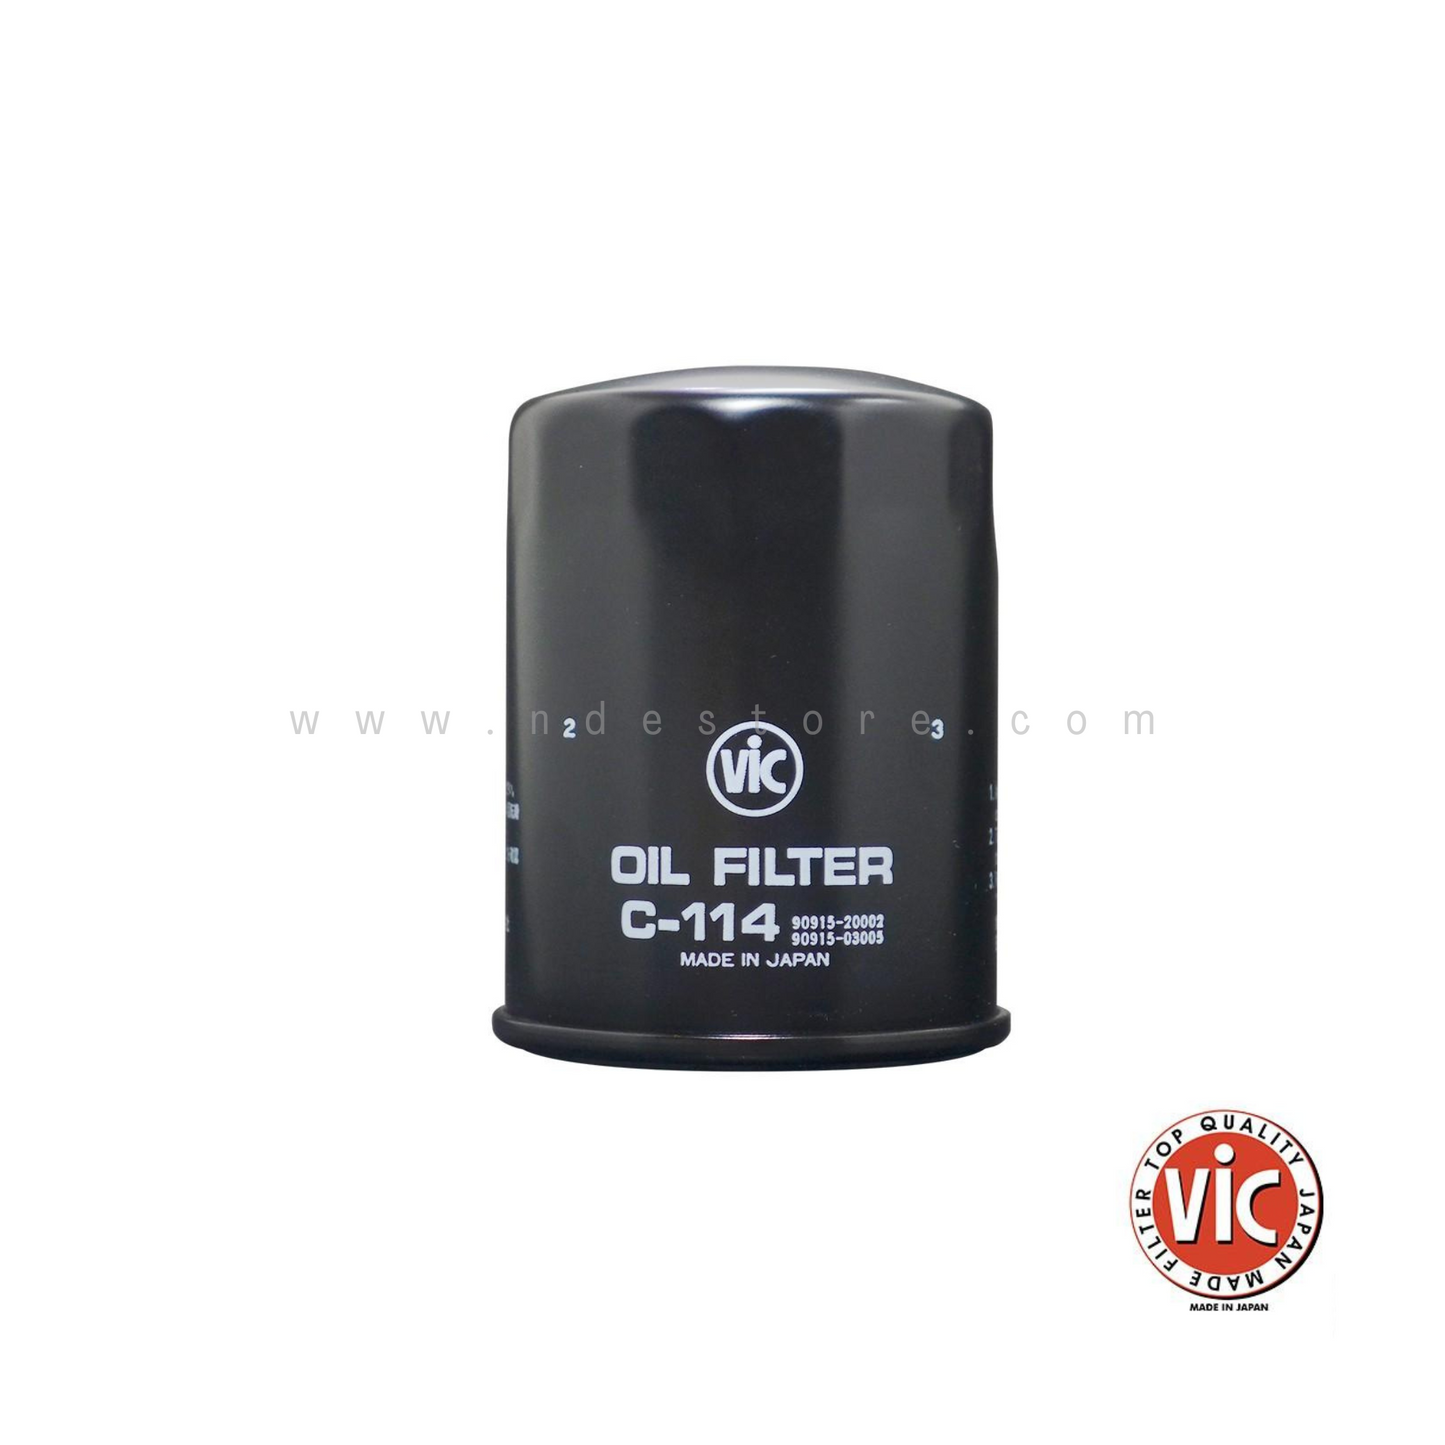 OIL FILTER VIC BRAND FOR HONDA ACCORD CL7